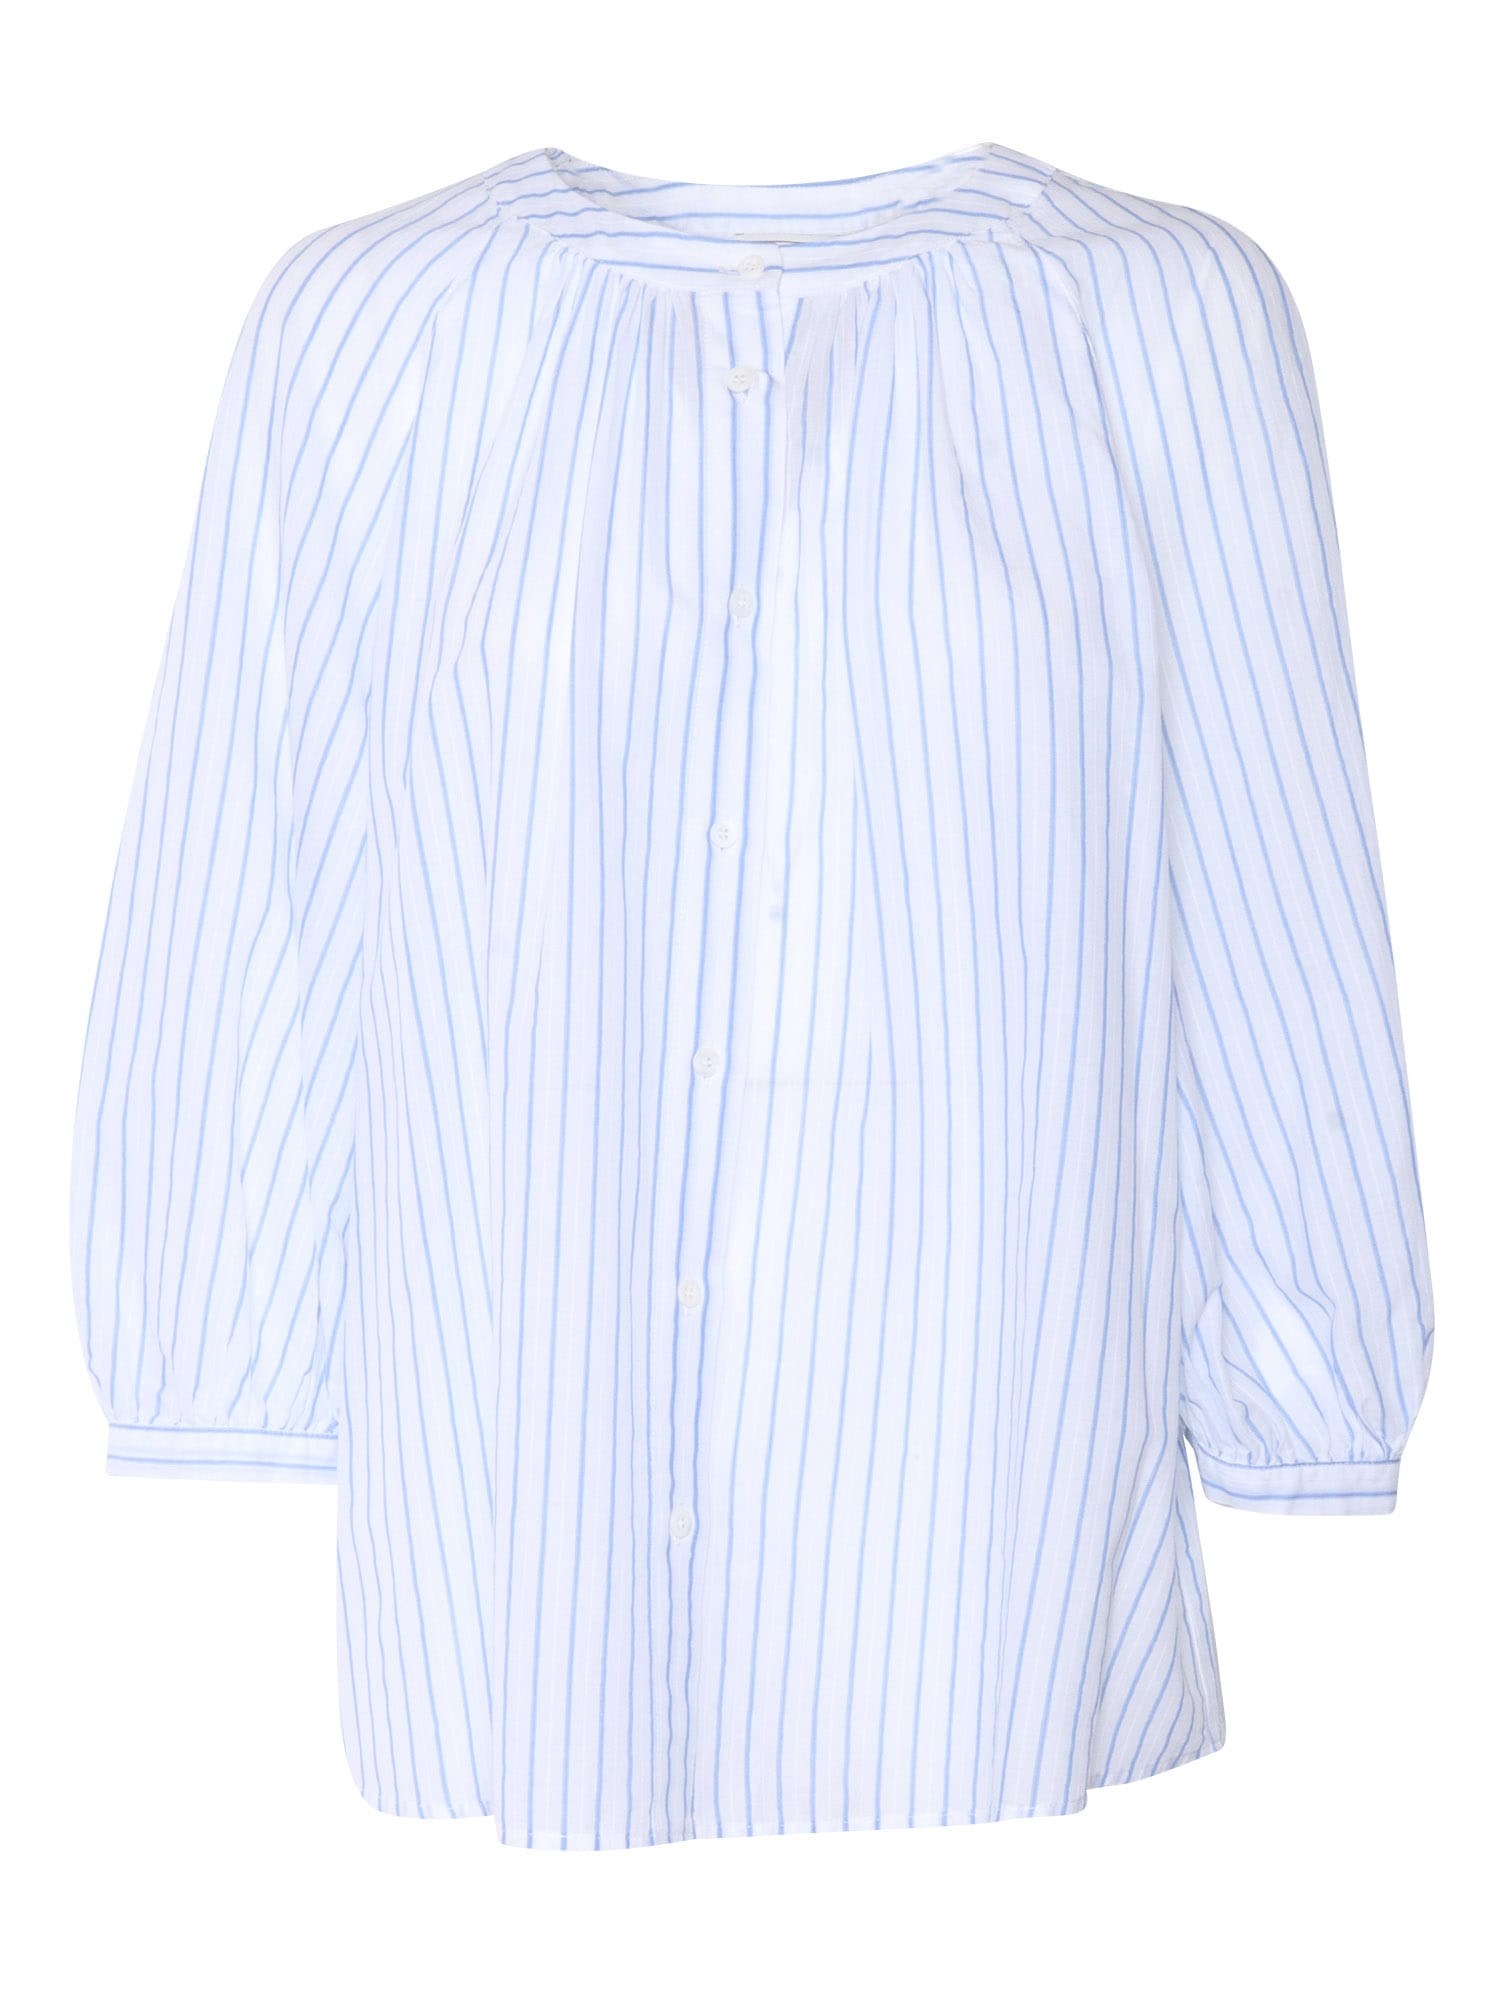 White Shirt With Stripes